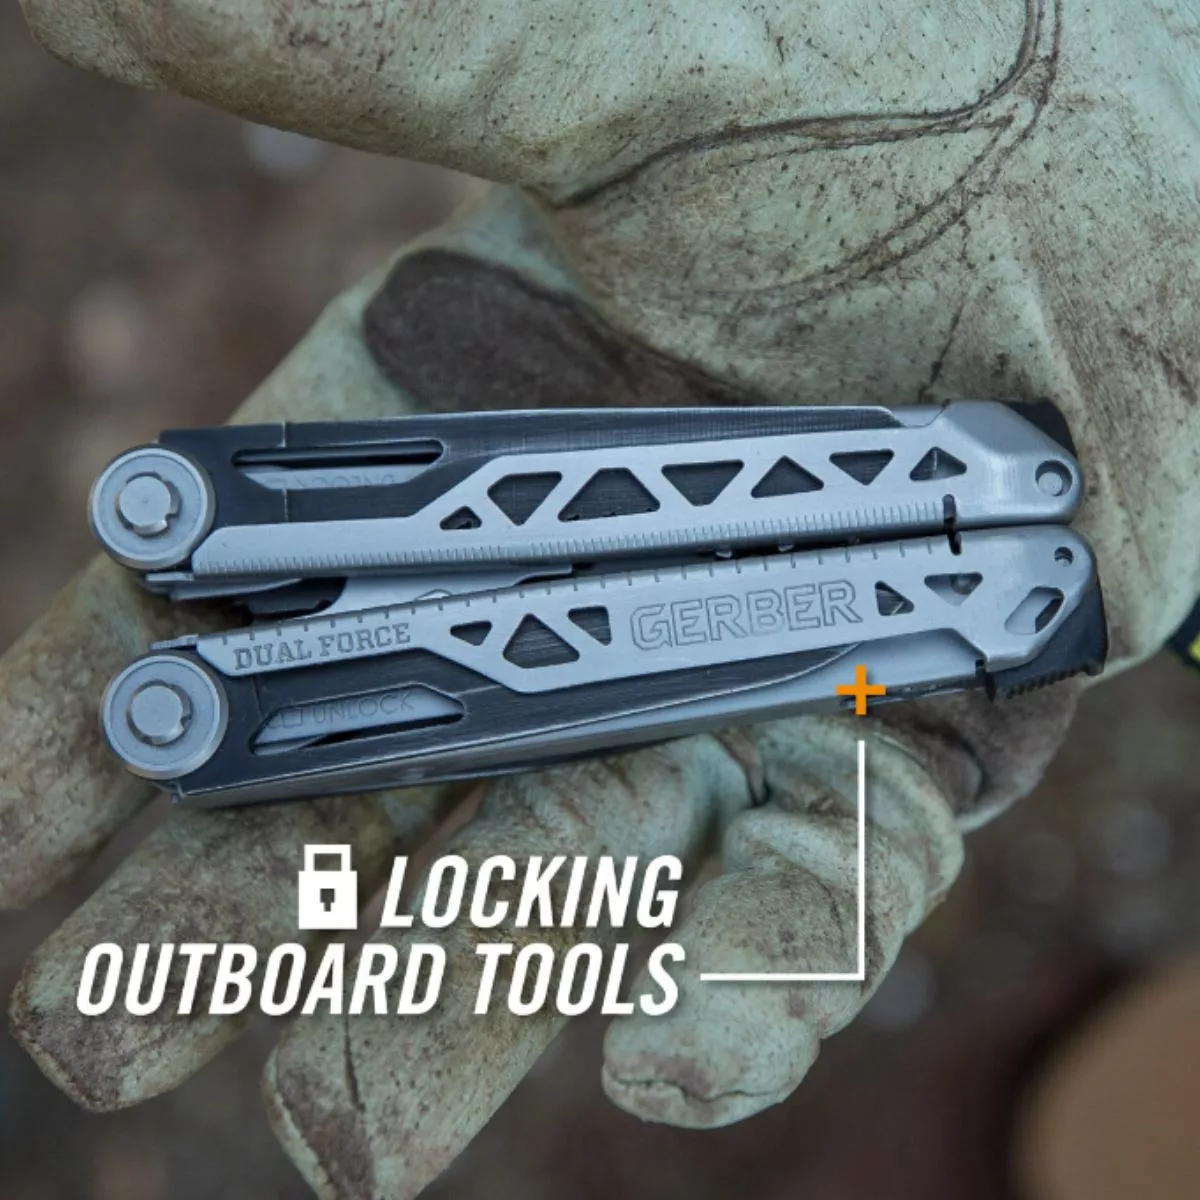 Multitool EDC (everyday carry) GERBER, Dual Force BB 5